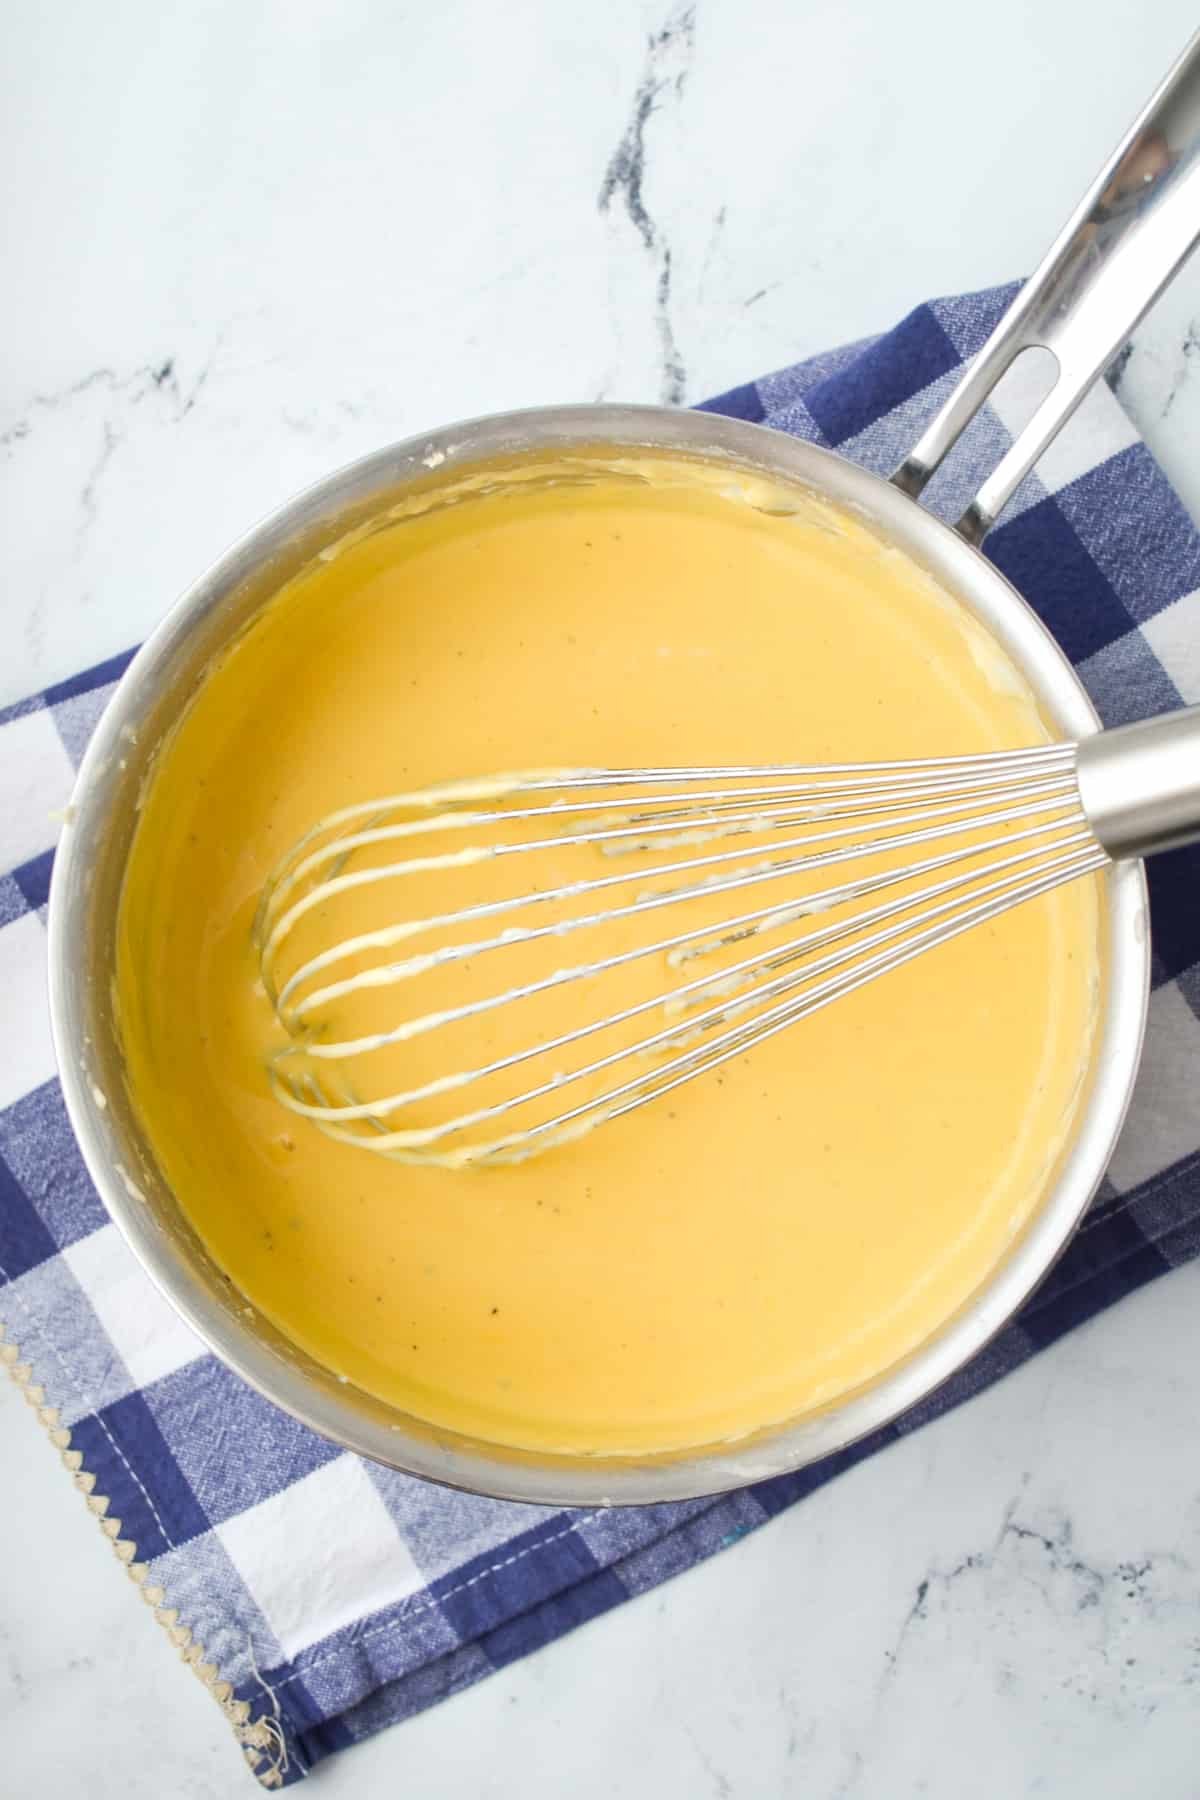 A saucepan filled with cheese sauce.